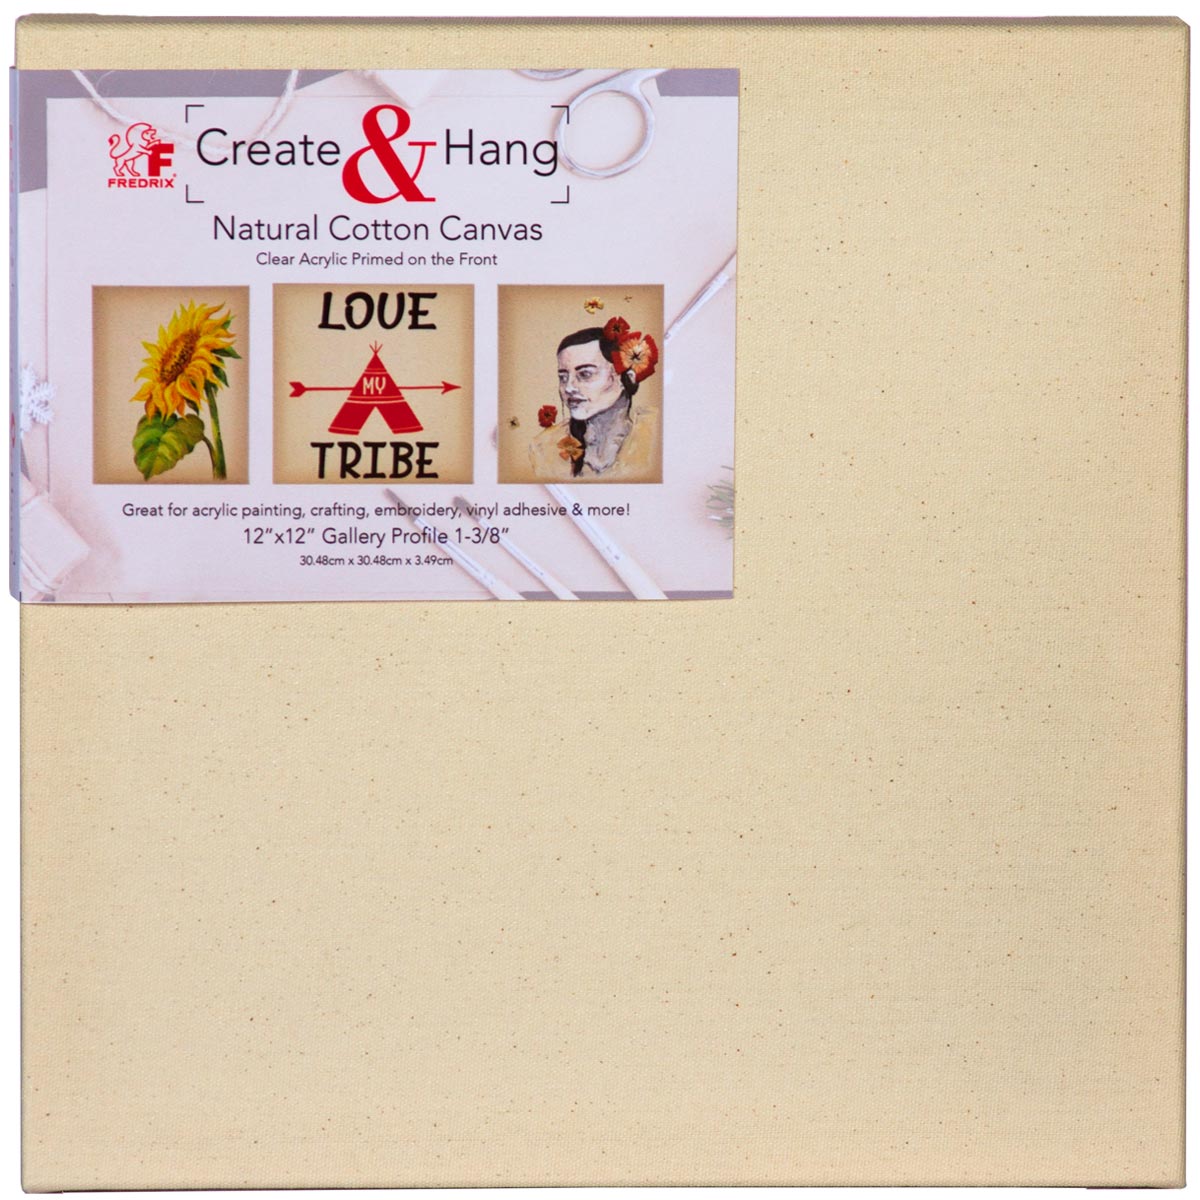 Create & Hang Natural Cotton Canvas, 8oz Primed 12 x 12 inches